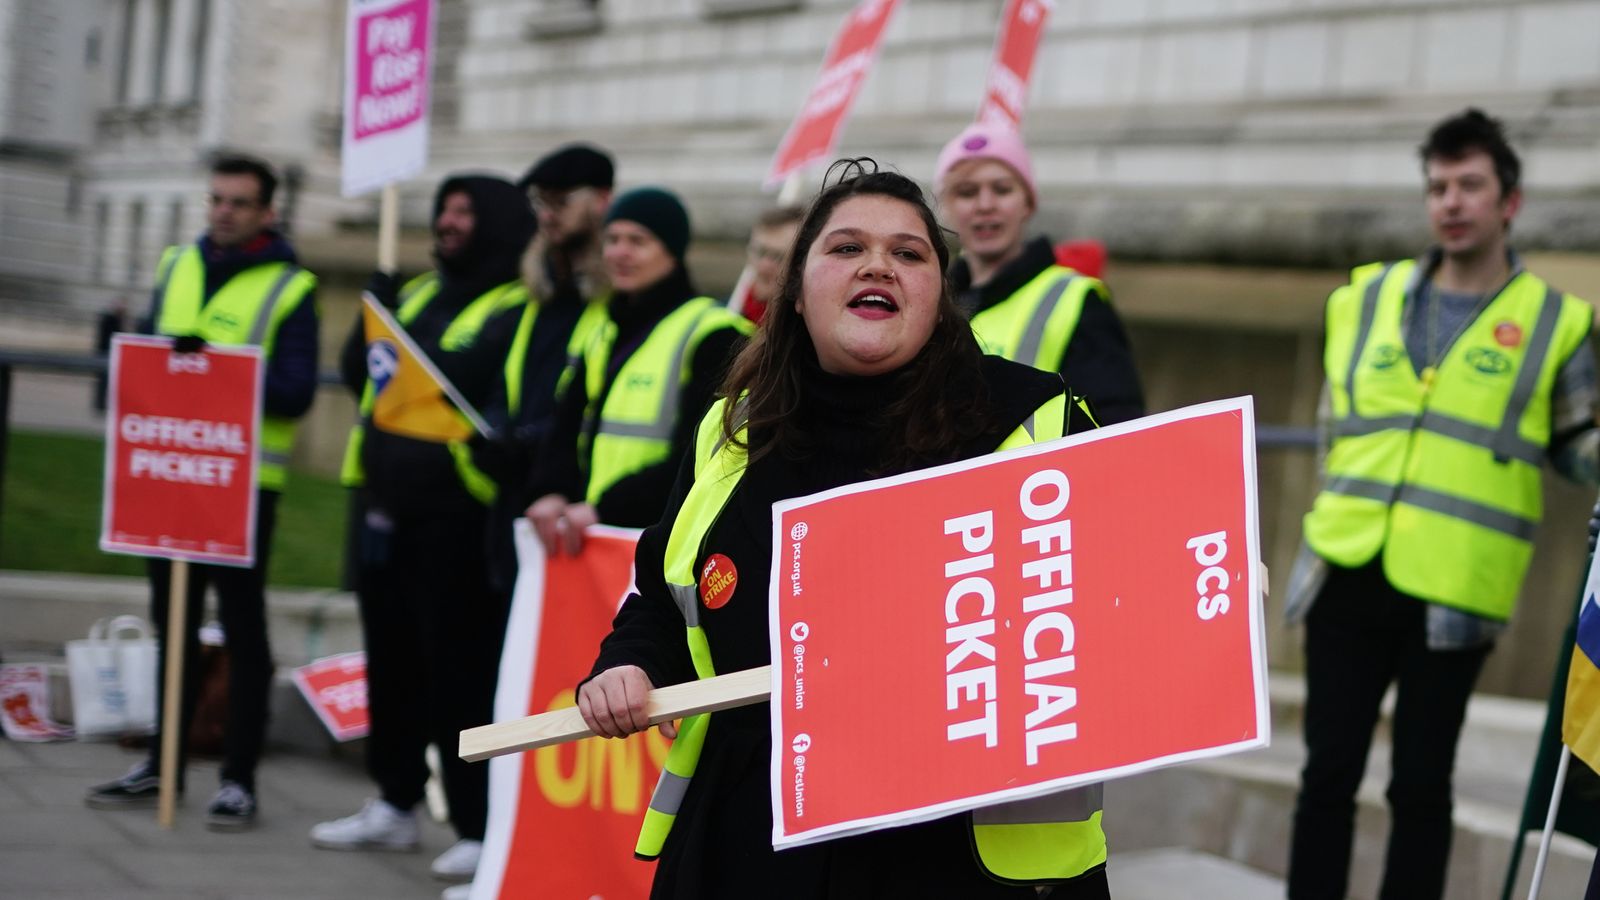 Civil servants to stage fresh walkouts as teaching union tells members to turn down offer